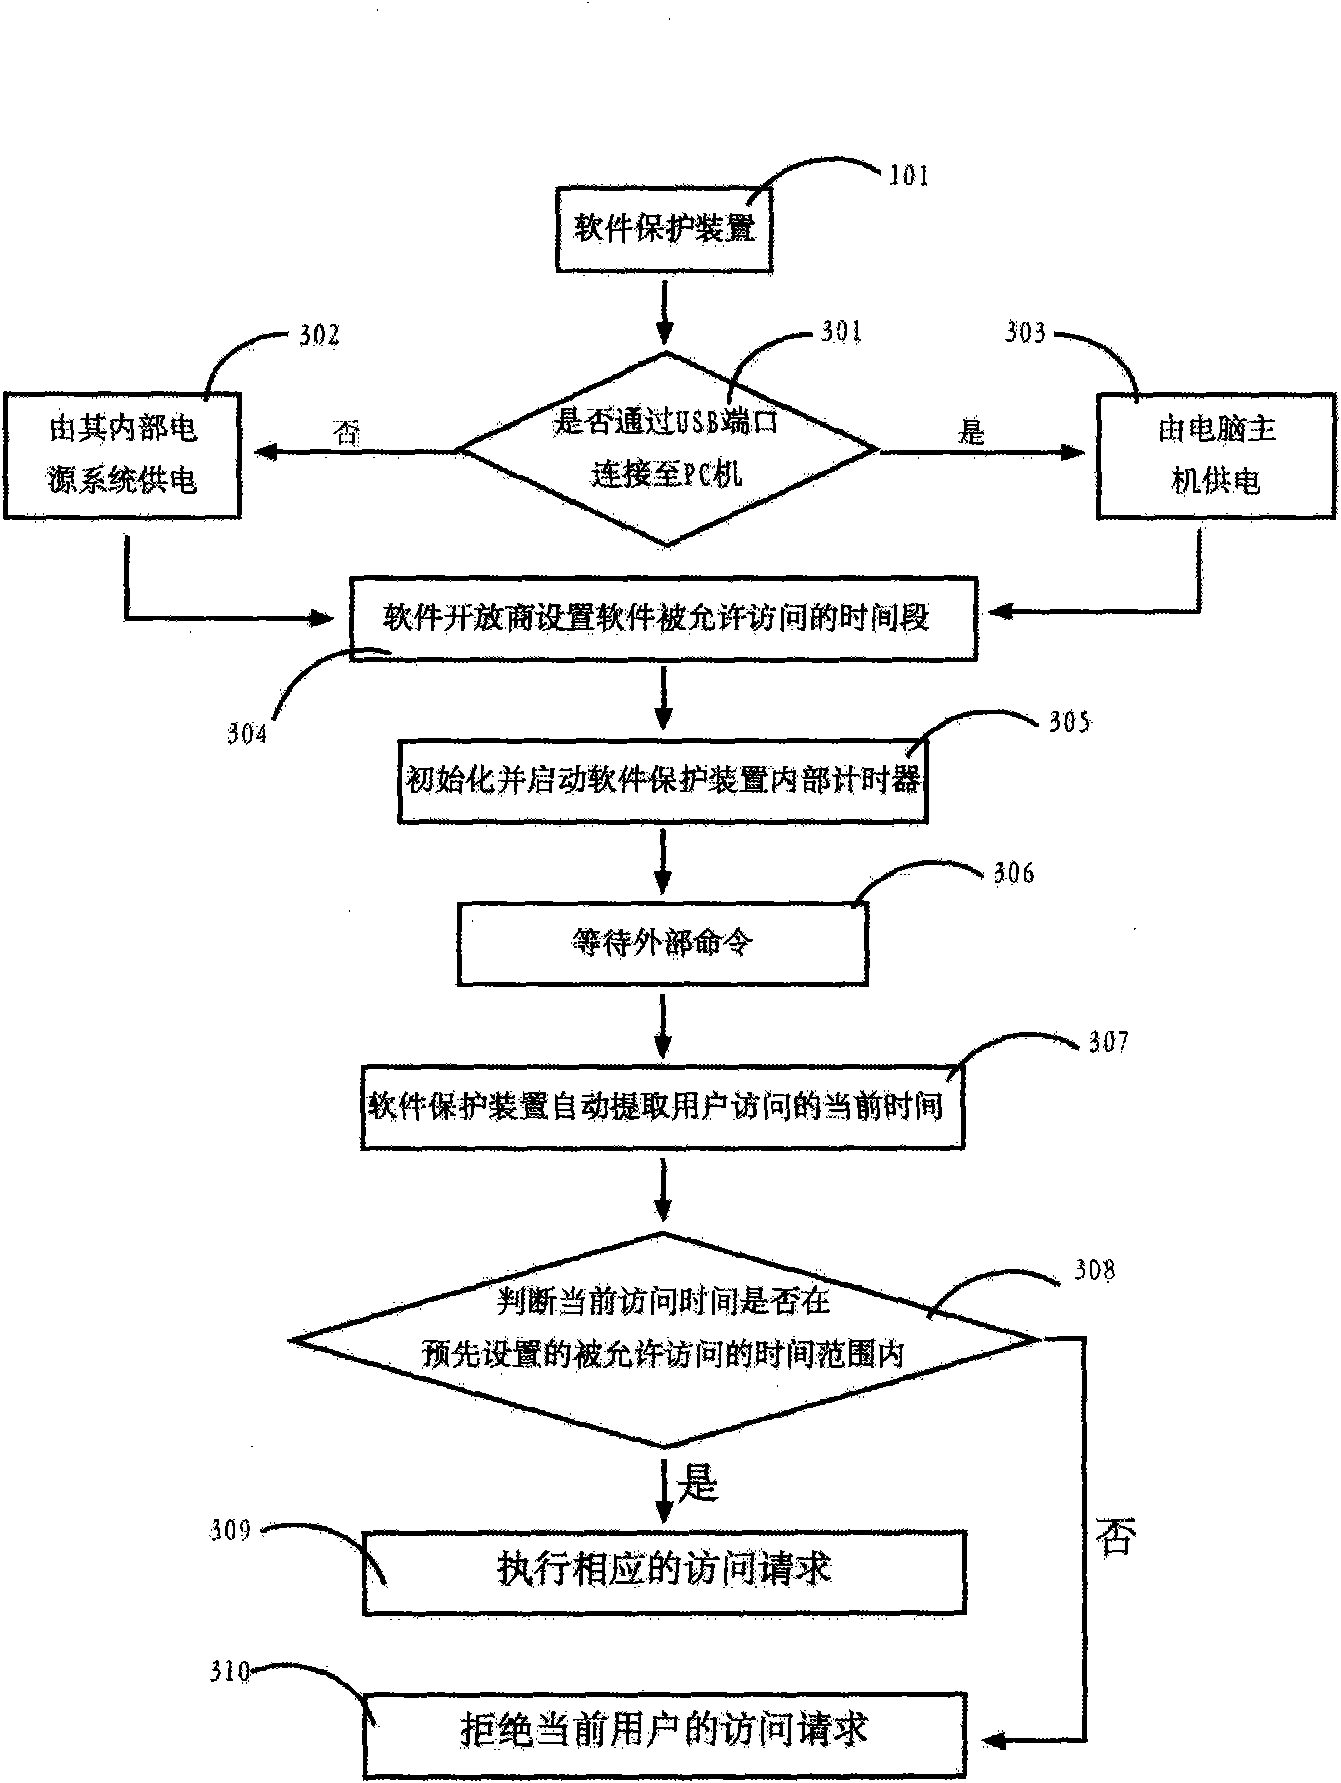 Method for realizing software authorization by using dual power supply system device independent of host computer in real time